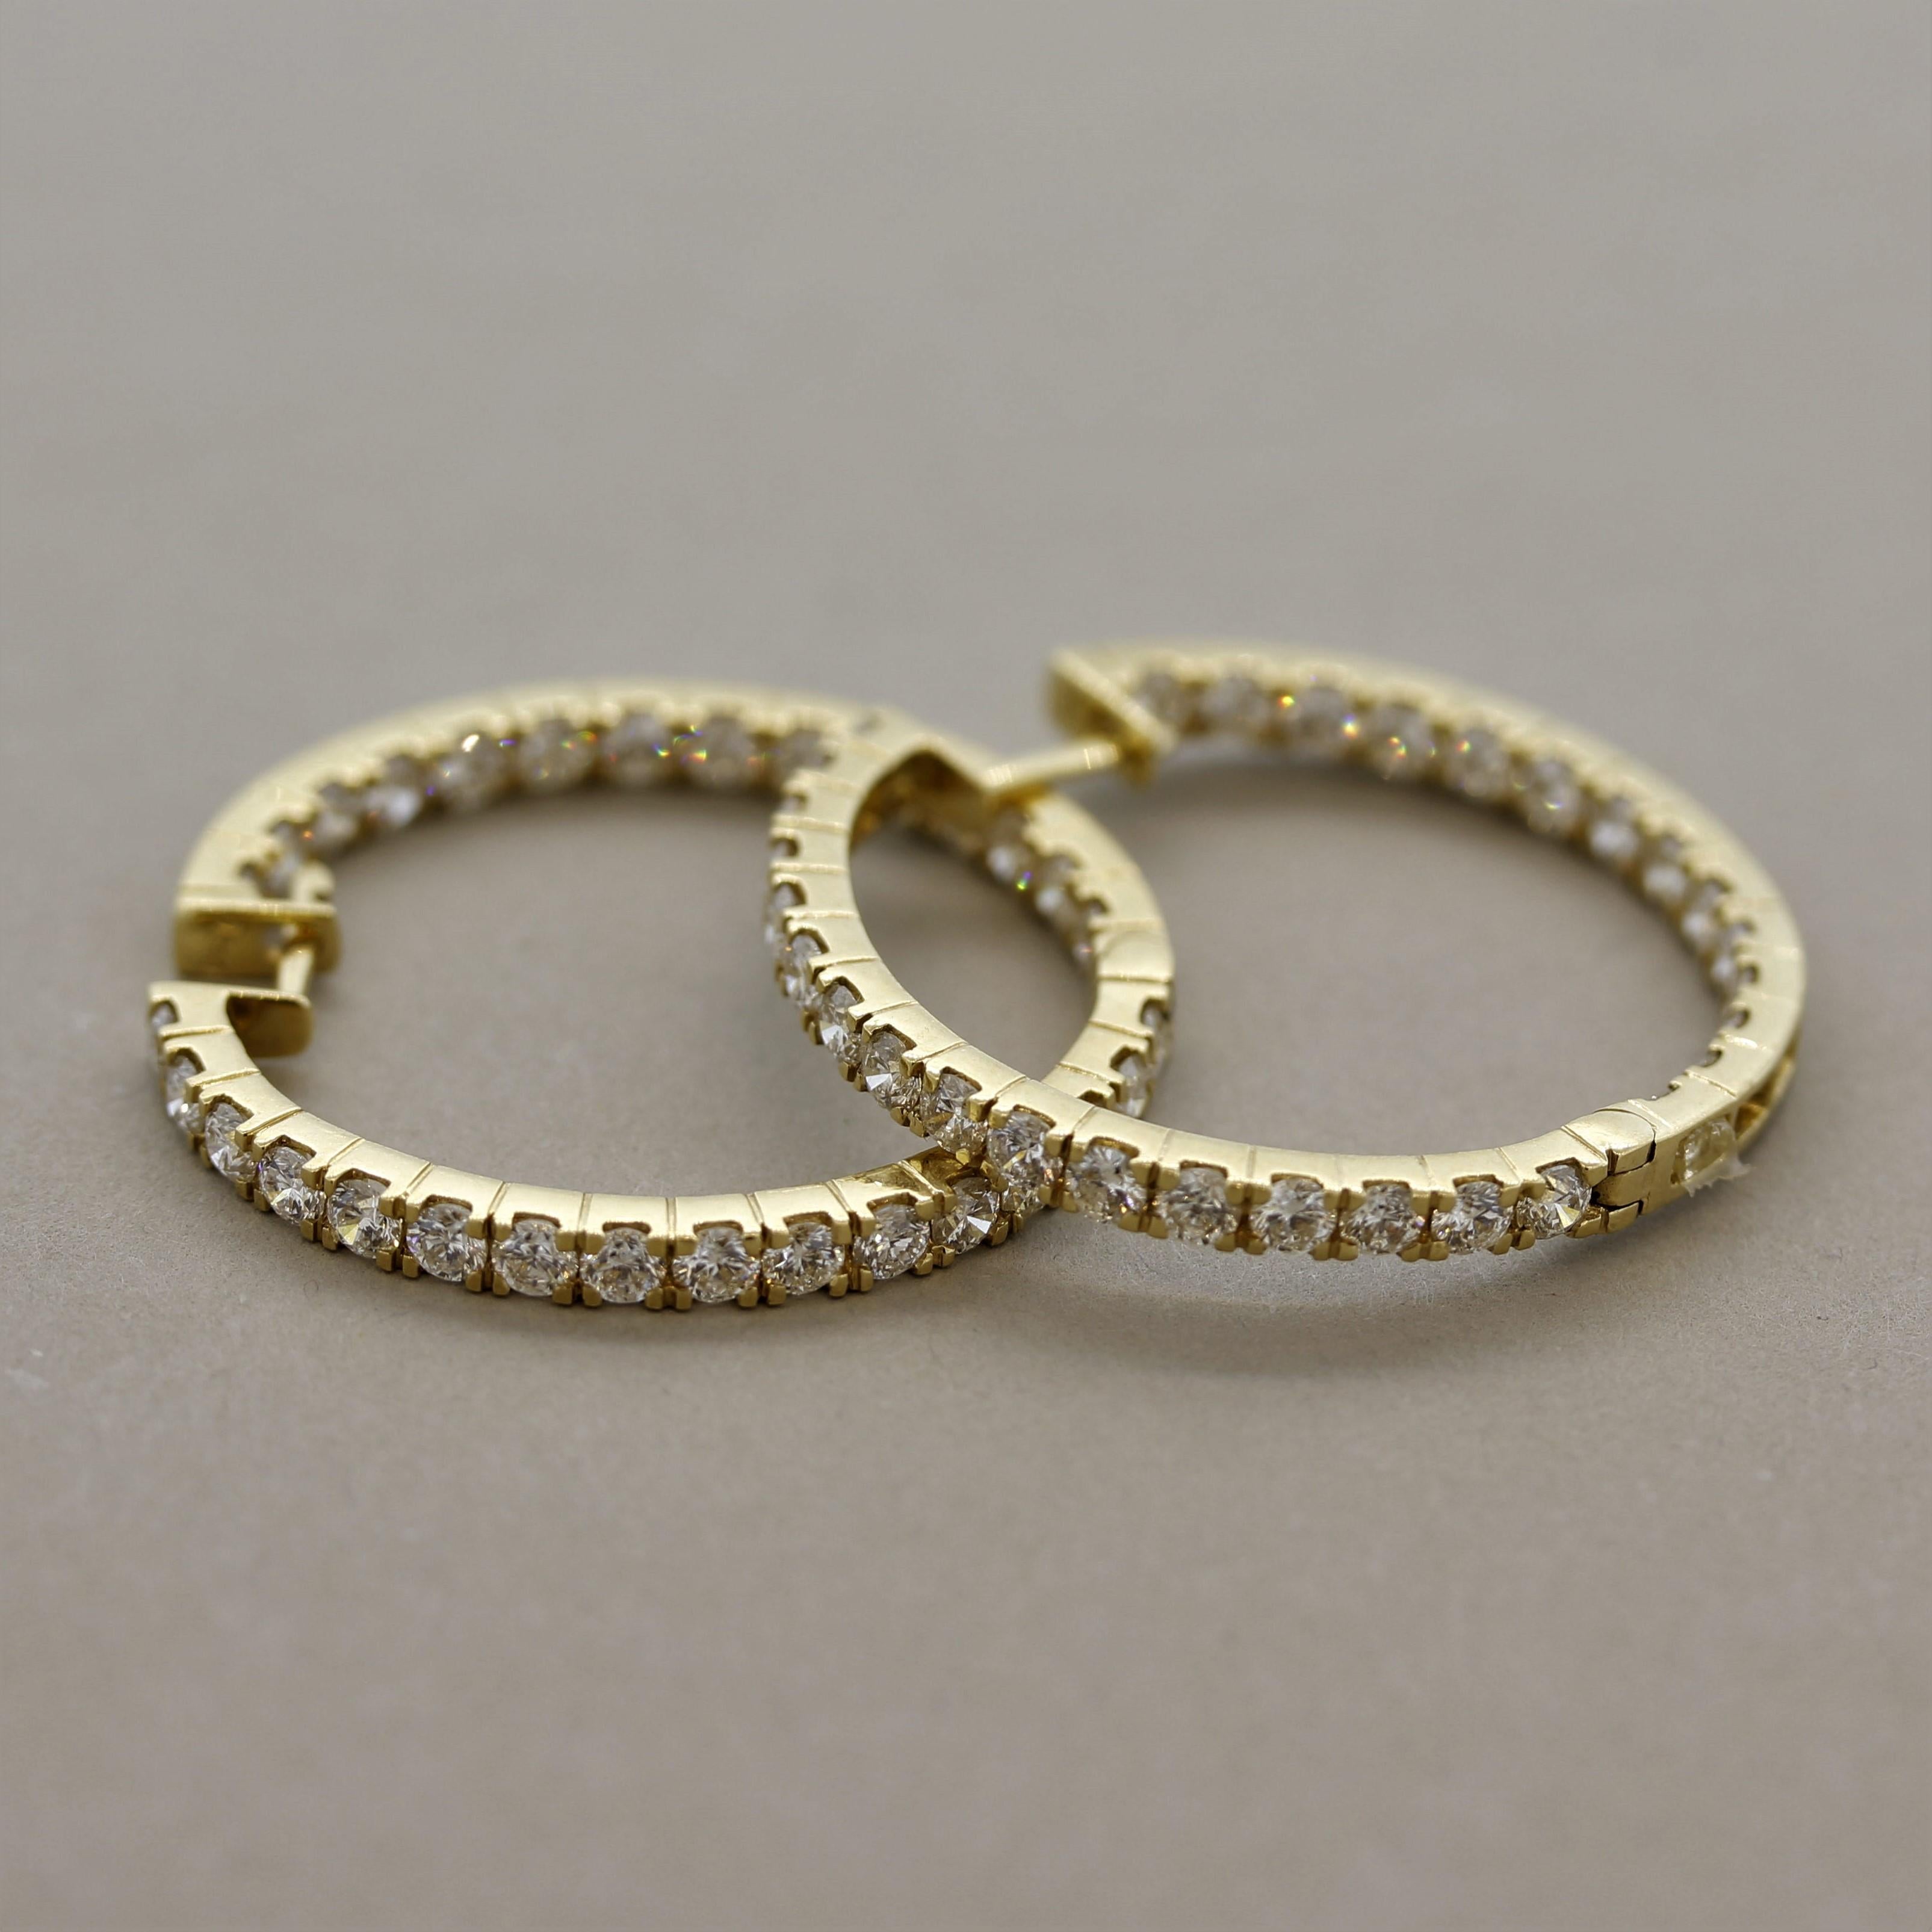 A lovely pair of hoop earrings featuring 4.22 carats of round brilliant cut diamonds. They are set both inside and outside of the earrings making it appear as if the entire earring is covered in diamonds! Made in 18k yellow gold.

Length: 1.1 inches